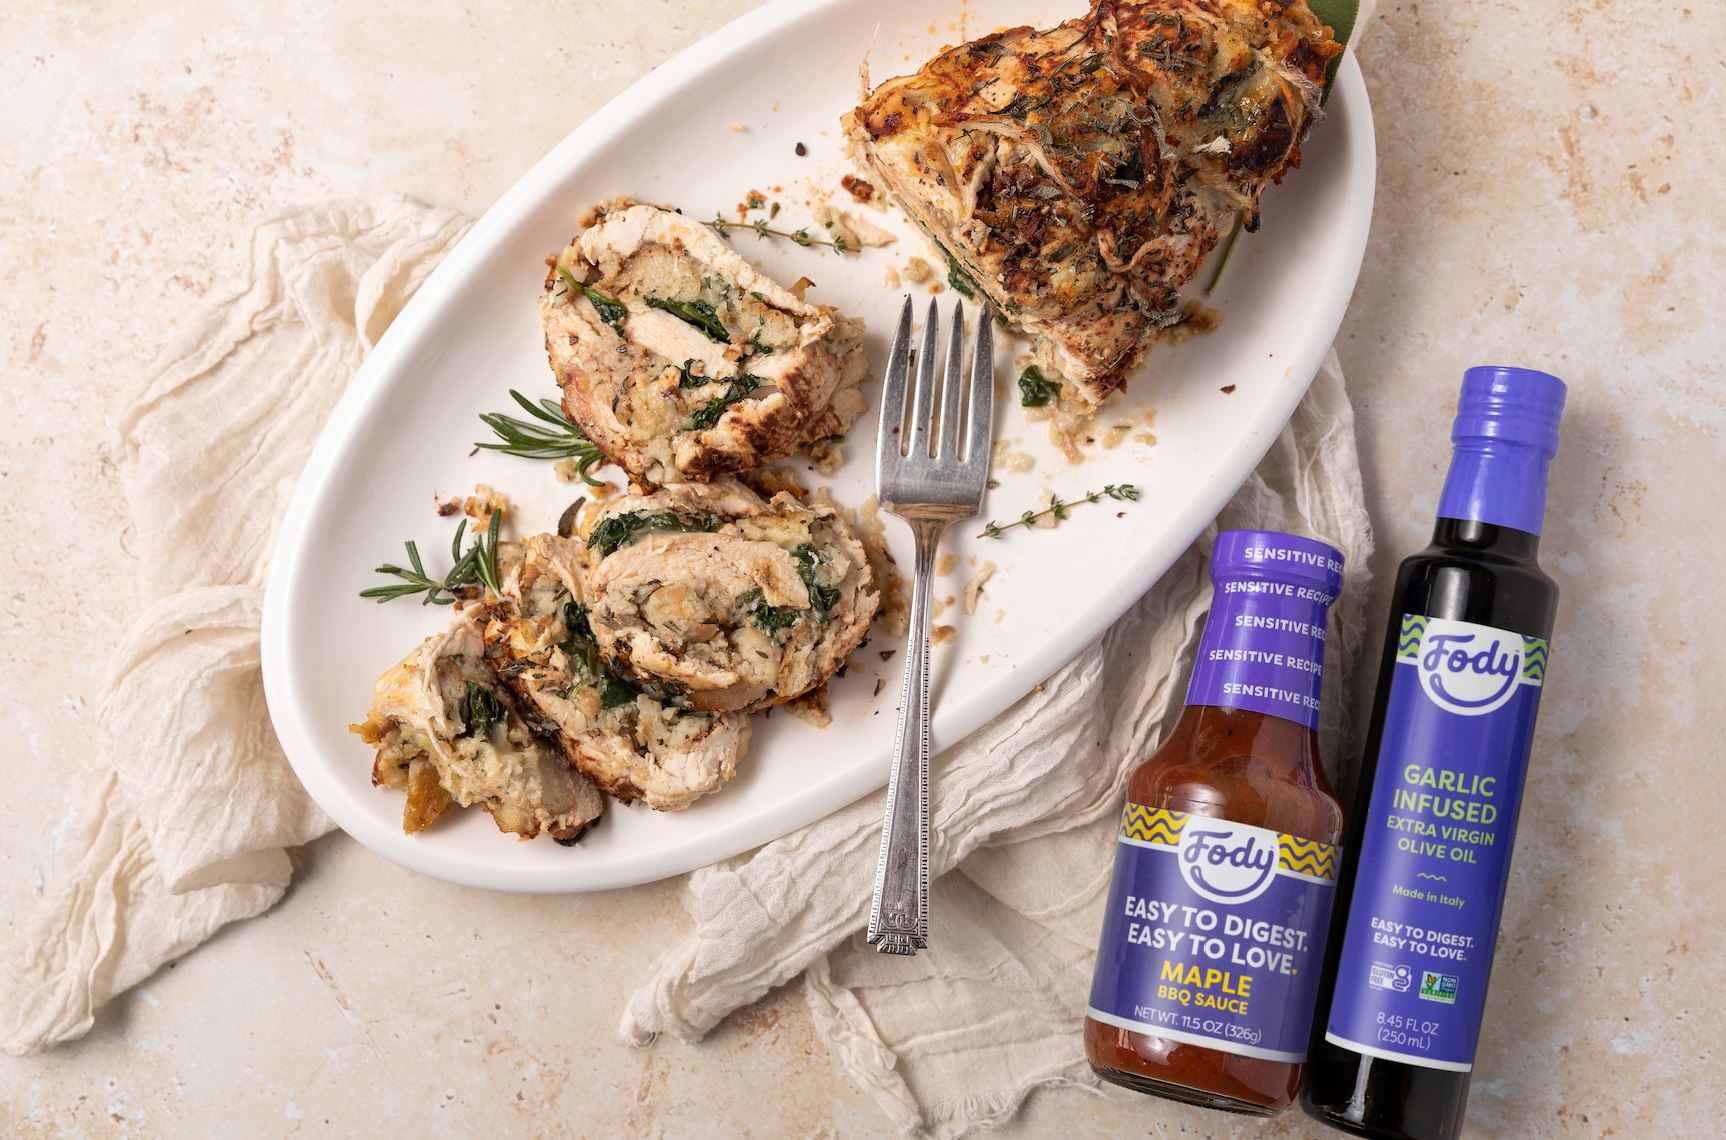 An image of Fody’s Spinach + Provolone Maple BBQ Turkey Roulade garnished with sprigs of rosemary, plated on an elegant white dish beside bottles of Fody's olive oil and BBQ sauce.